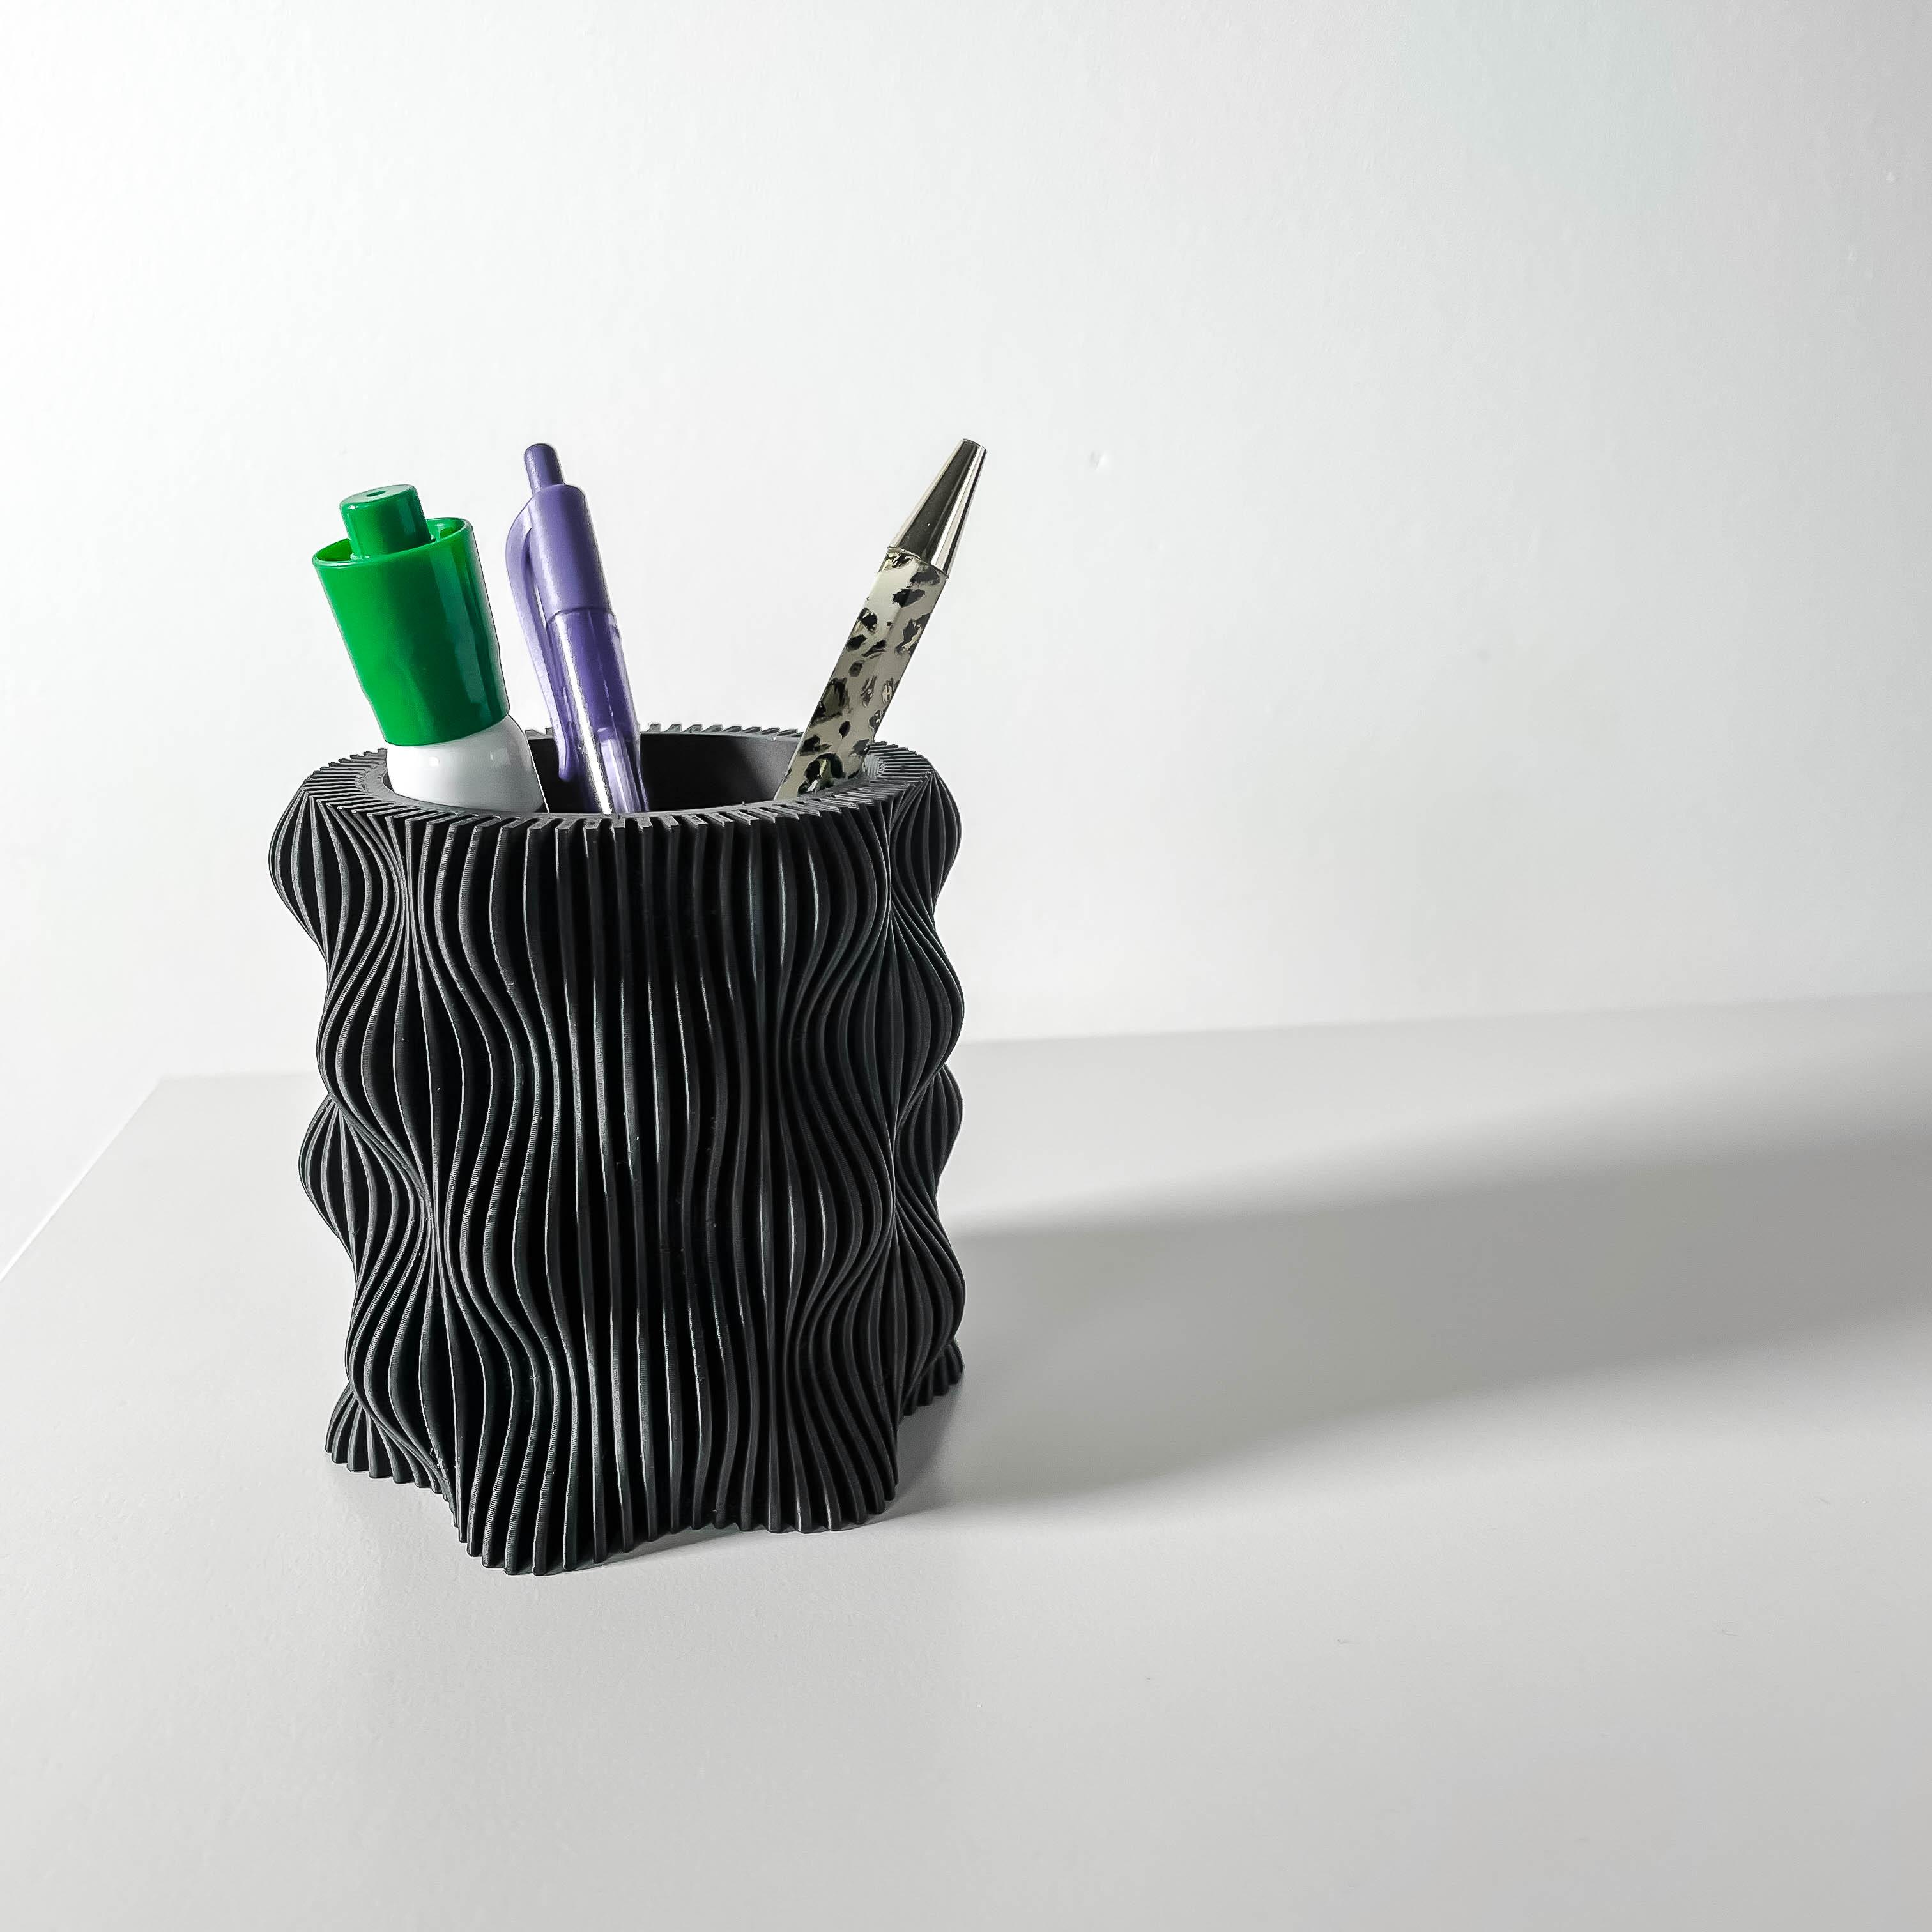 The Muxel Pen Holder | Desk Organizer and Pencil Cup Holder | Modern Office and Home Decor 3d model